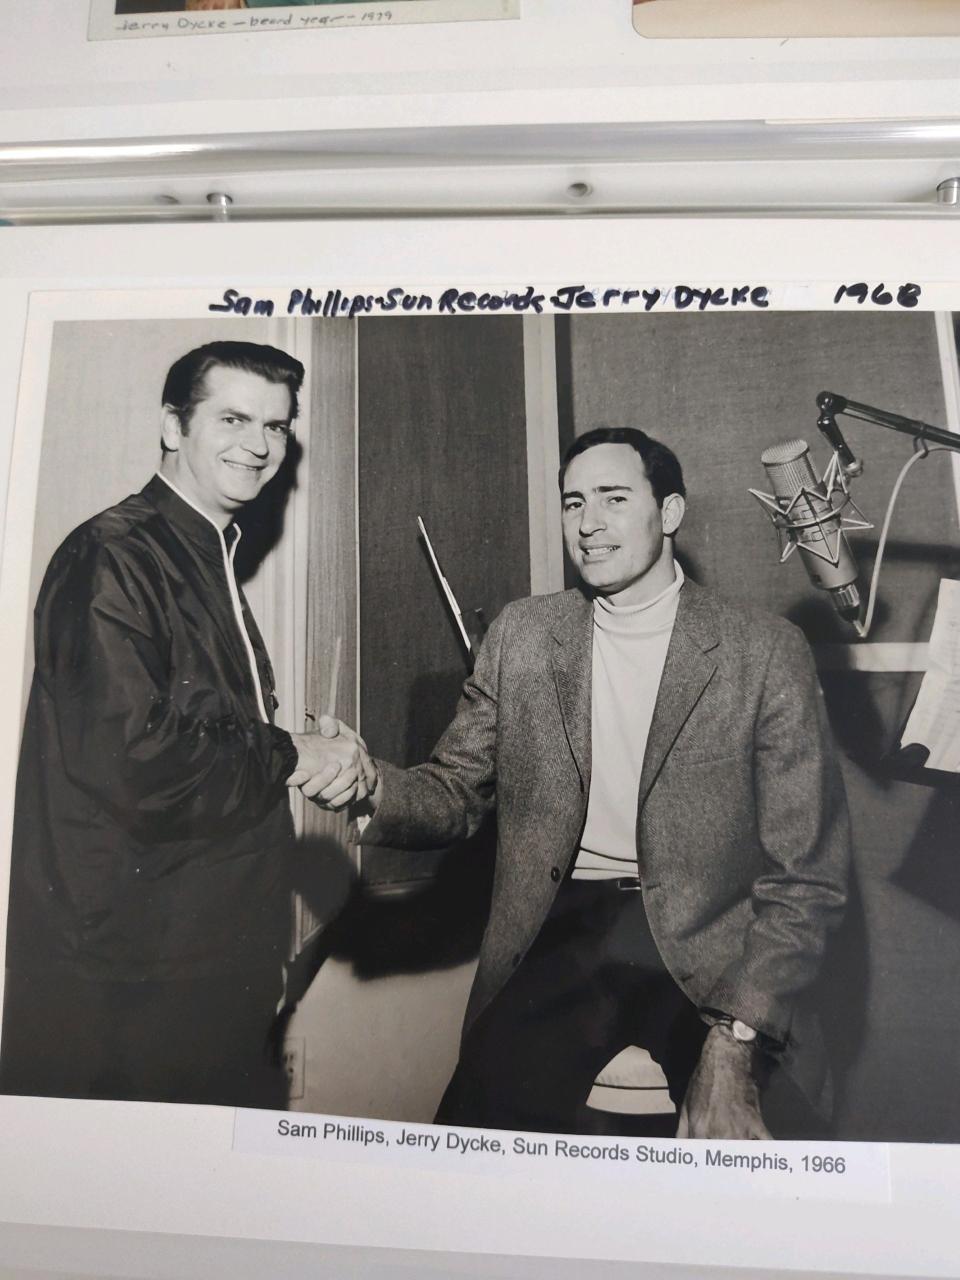 Jerry Dycke, who then lived in Topeka, shook hands in 1966 with Sun Records owner Sam Phillips at his studio in Memphis. Dycke spent five years recording music under contract with the company.